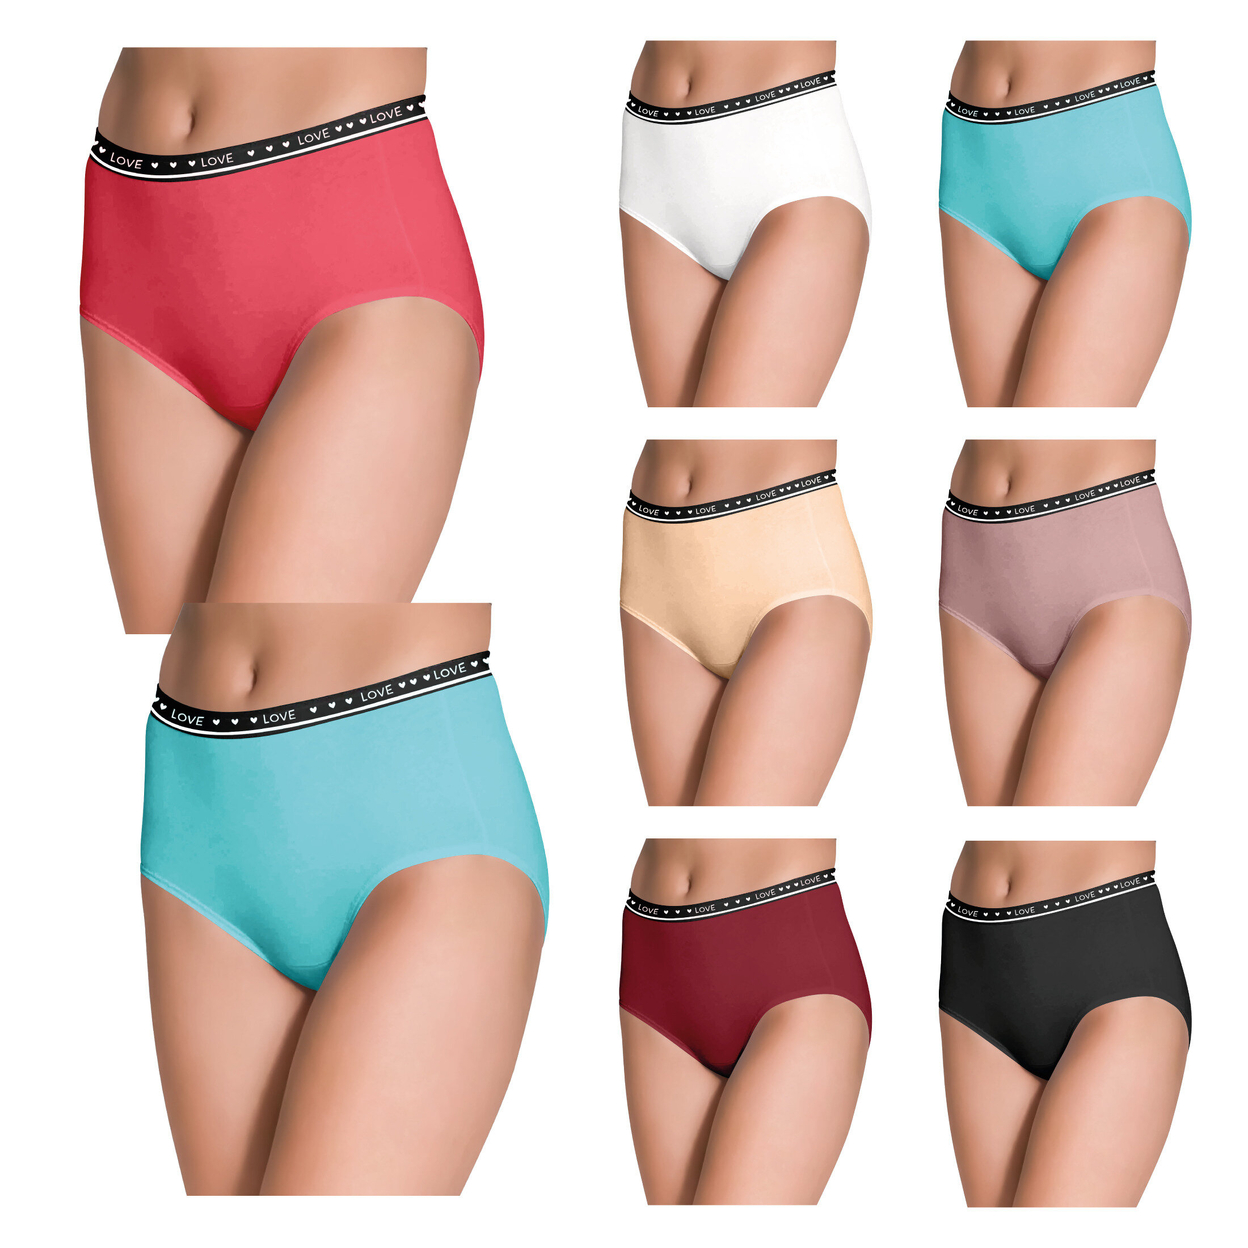 6-Pack: Women's Ultra Soft Moisture Wicking Panties Cotton Perfect Fit Underwear (Plus Sizes Available) - X-large